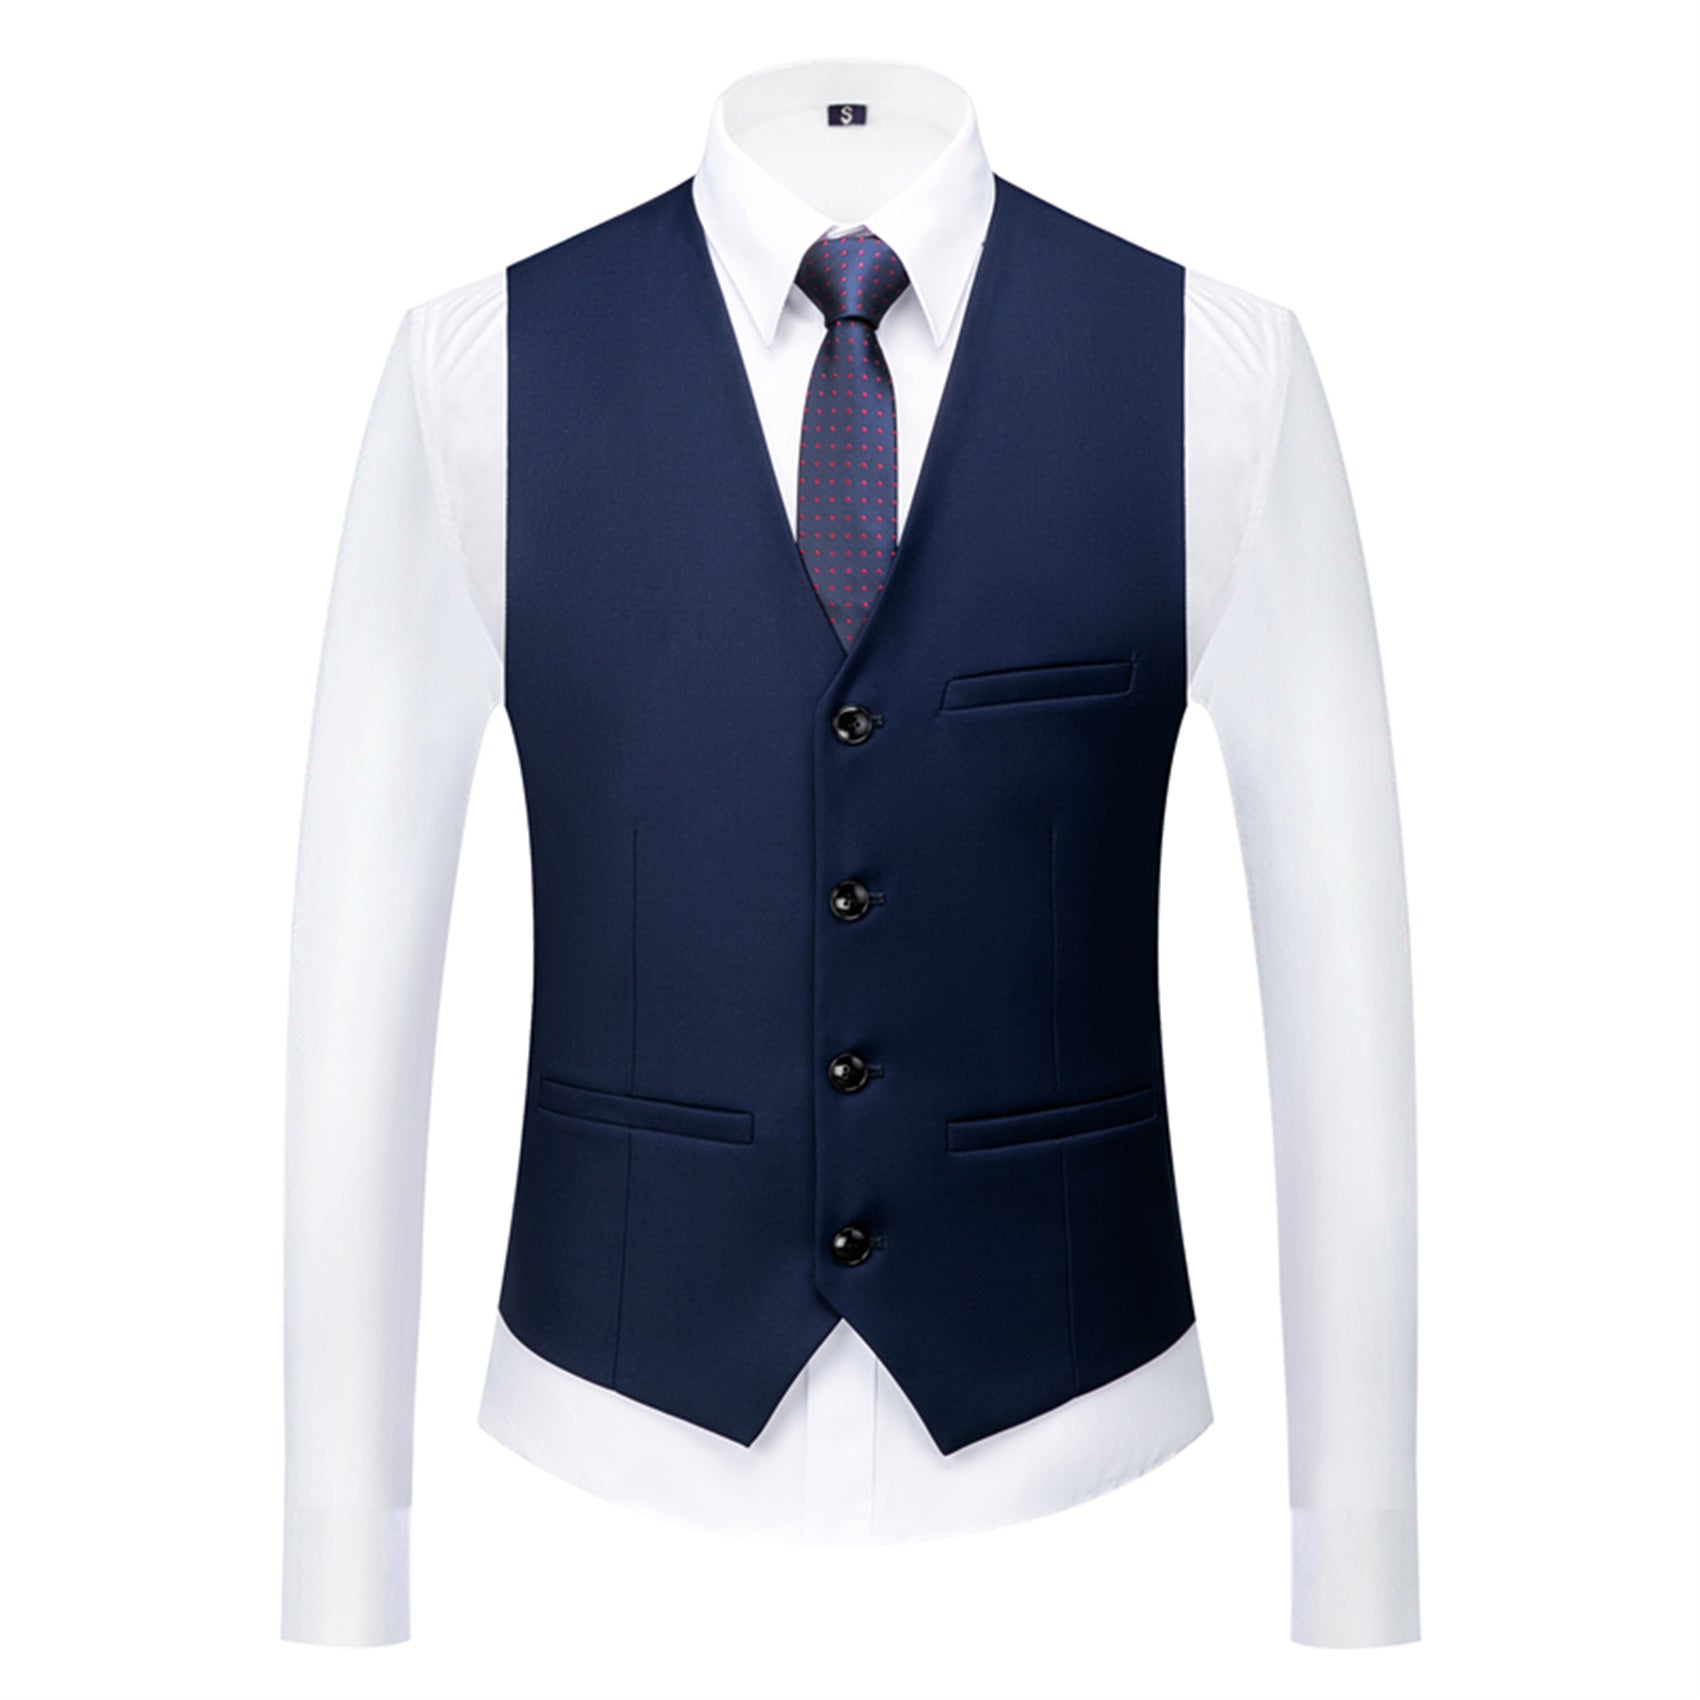 Men's Single Breasted Stylish Plain Vest Four Buttons Slim Fit Solid Waistcoat